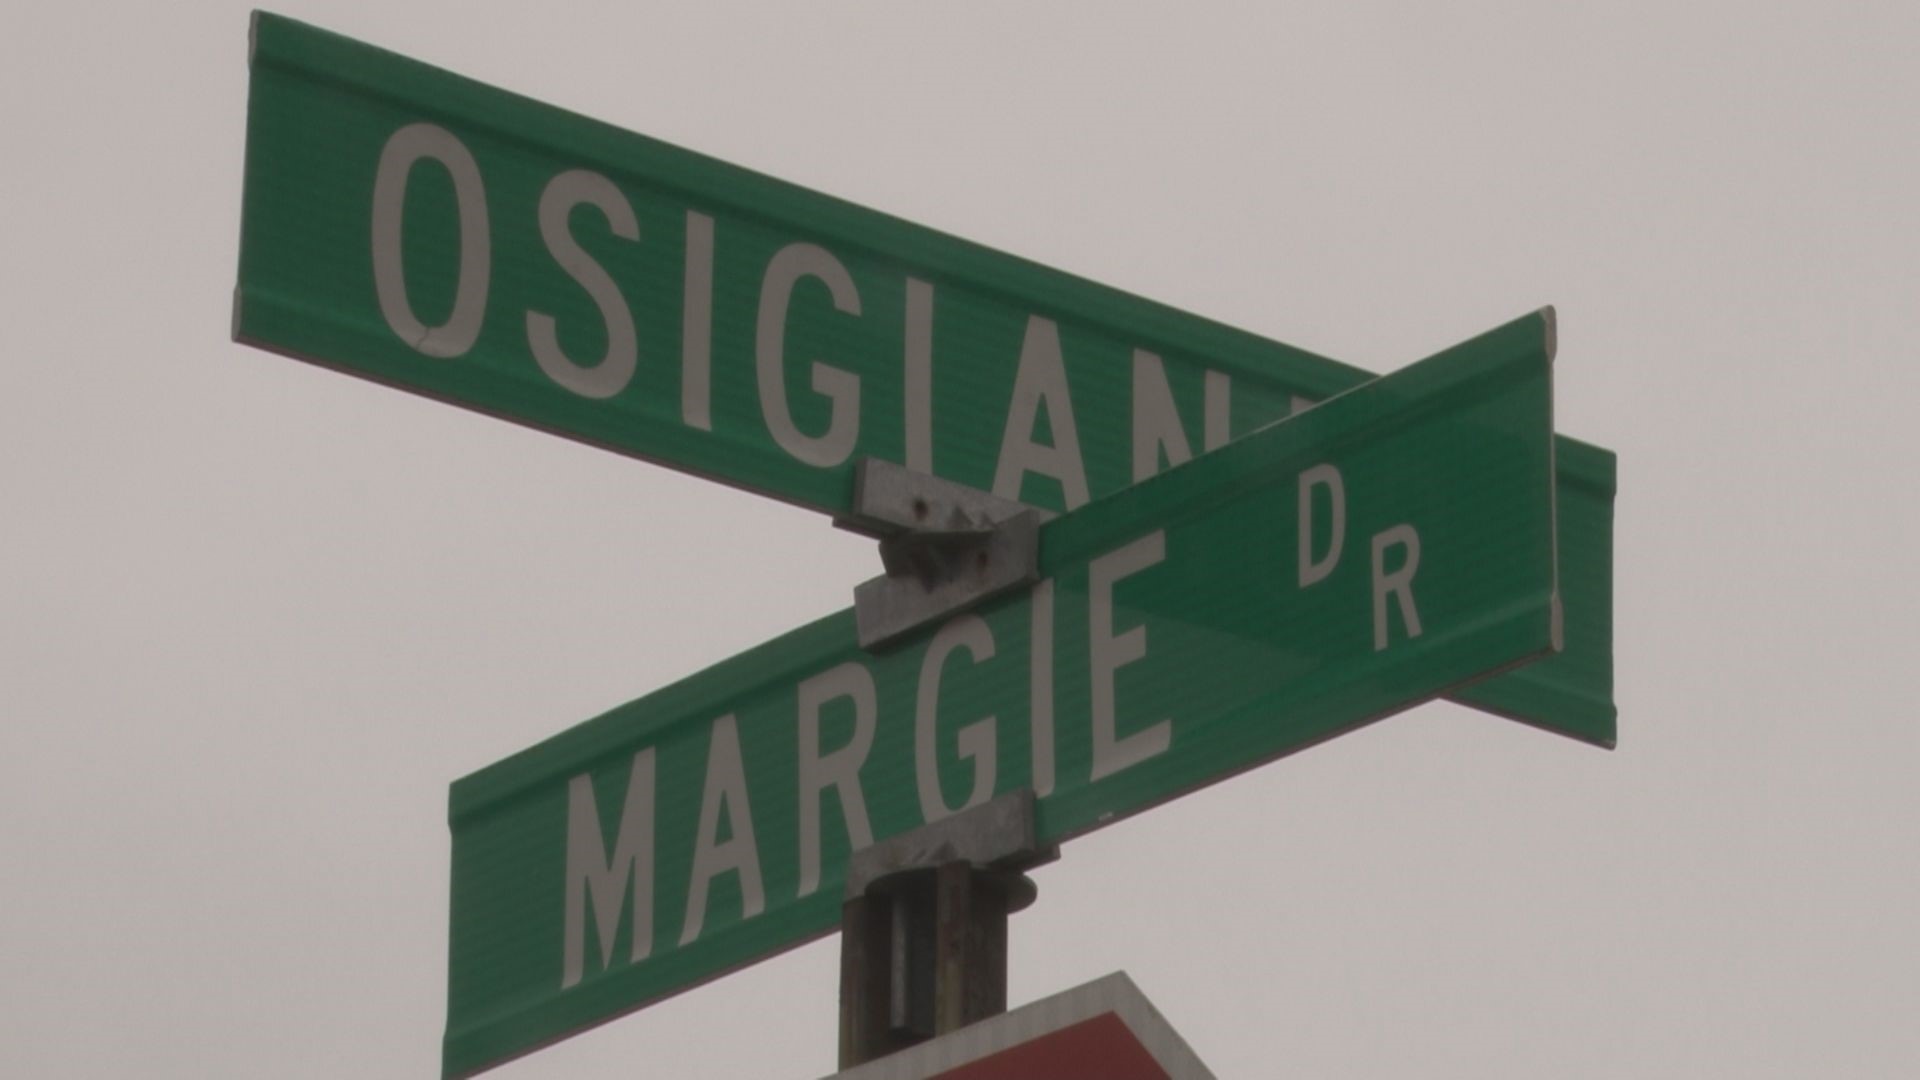 Claudia Robinson says the 4-way stop at the intersection of Margie Drive and Osigian Boulevard needs a stoplight.